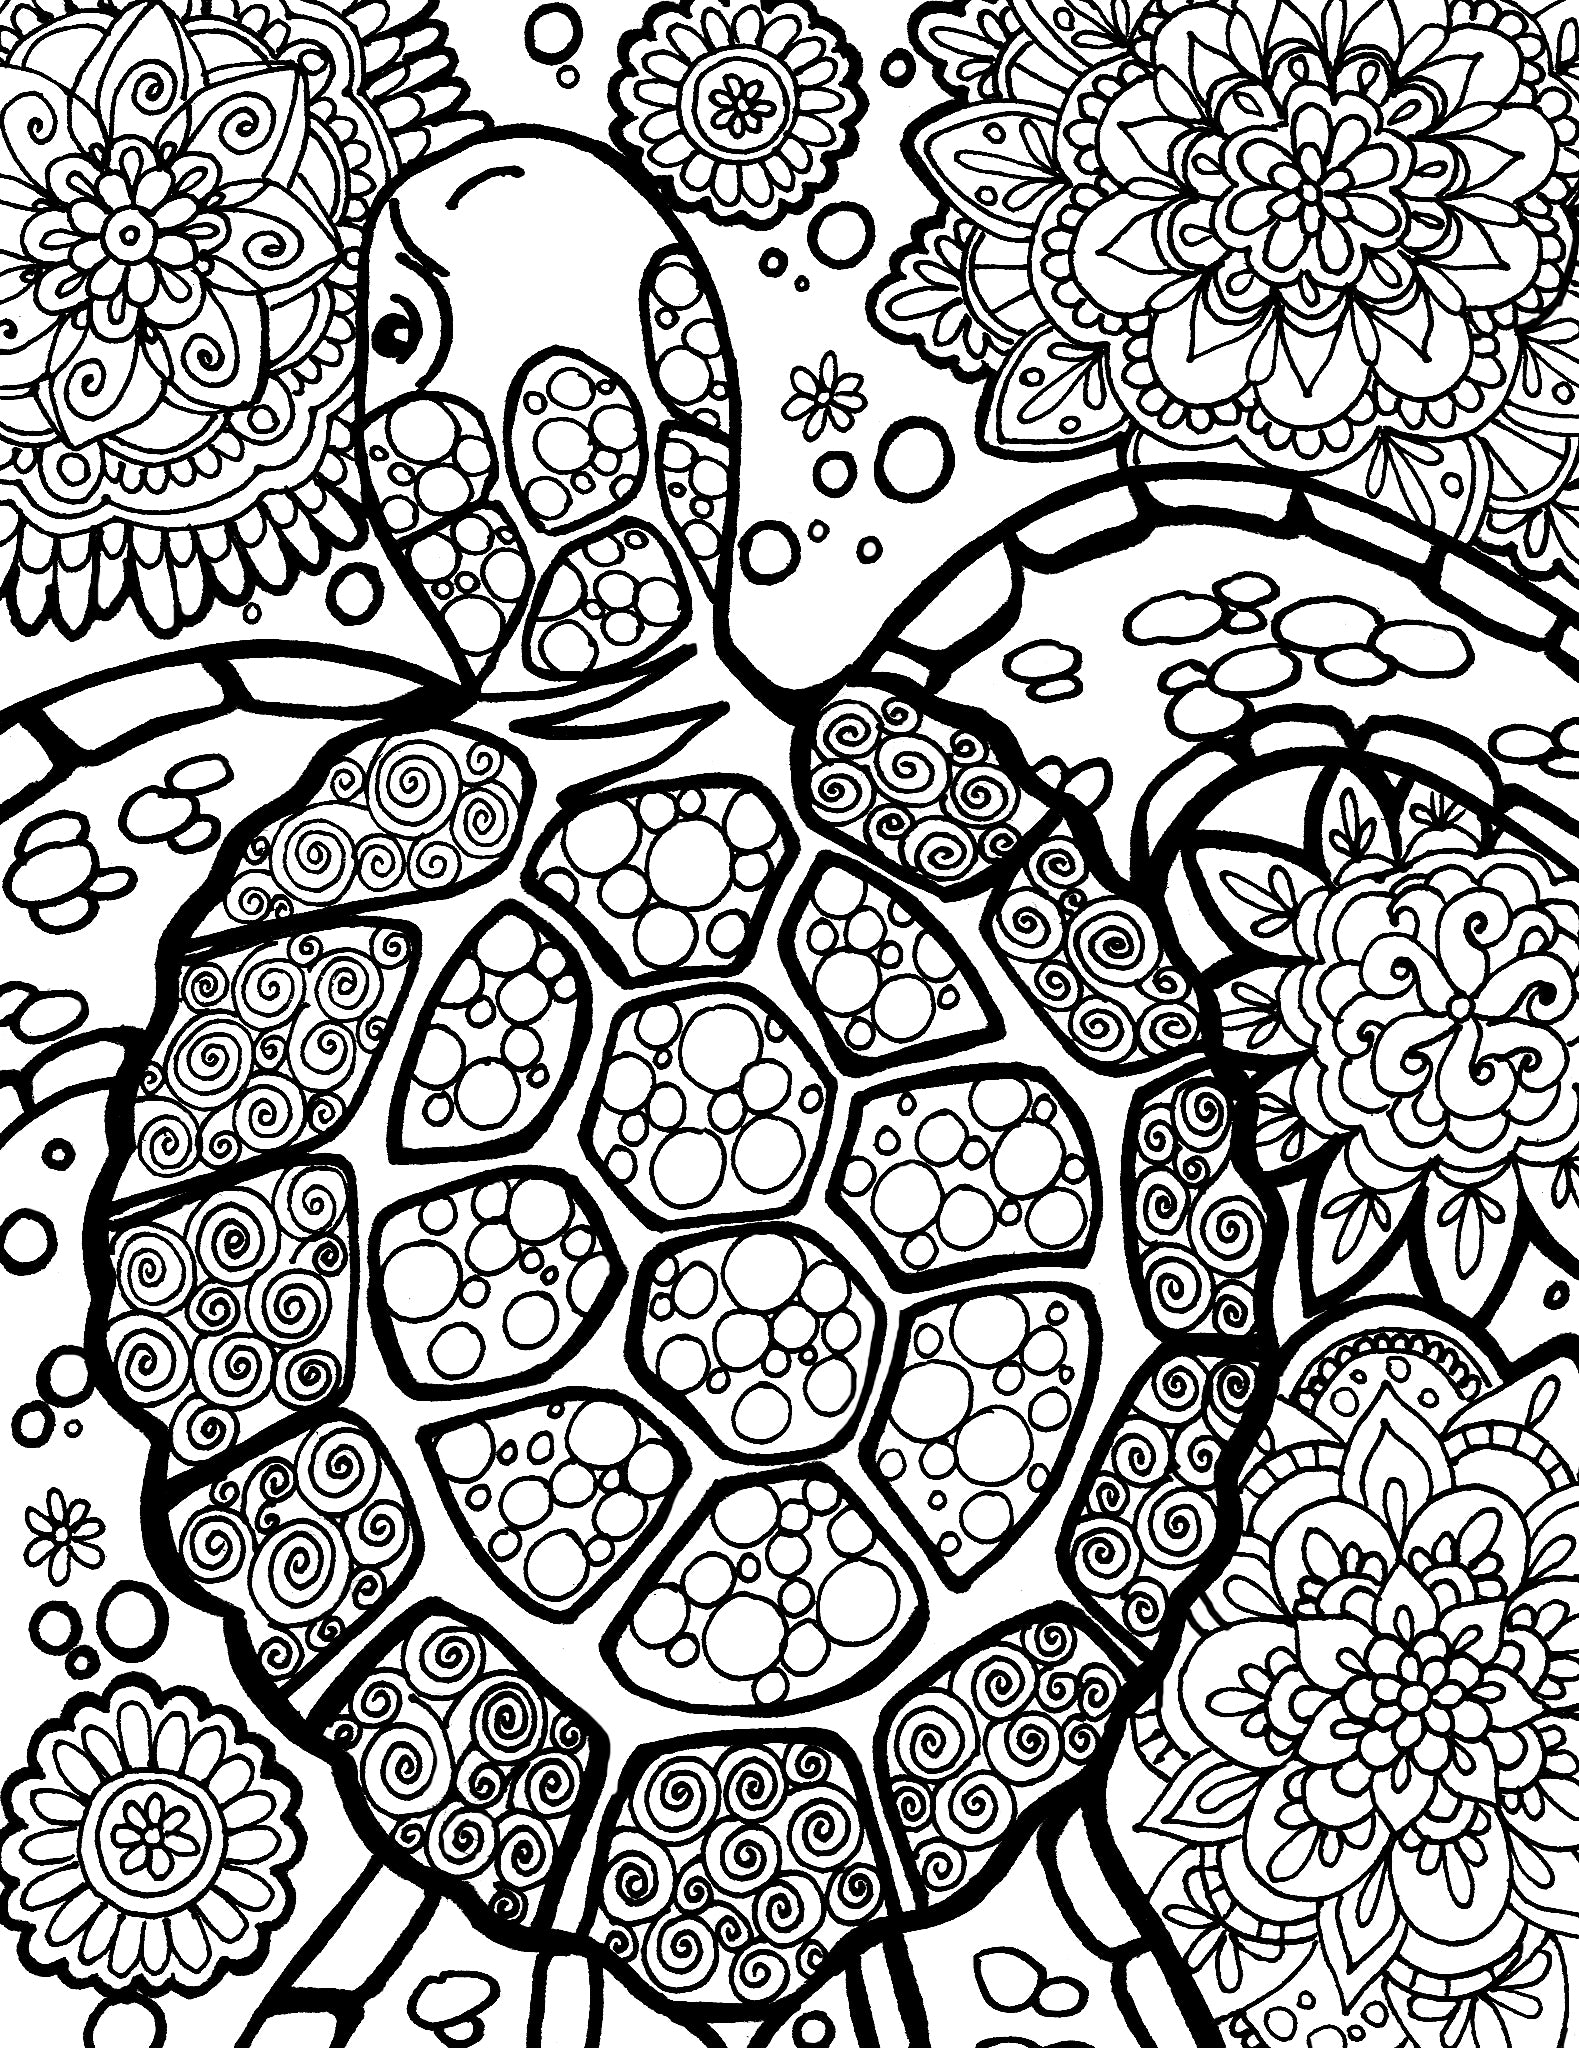 Sea turtle with bubbles - You-Color